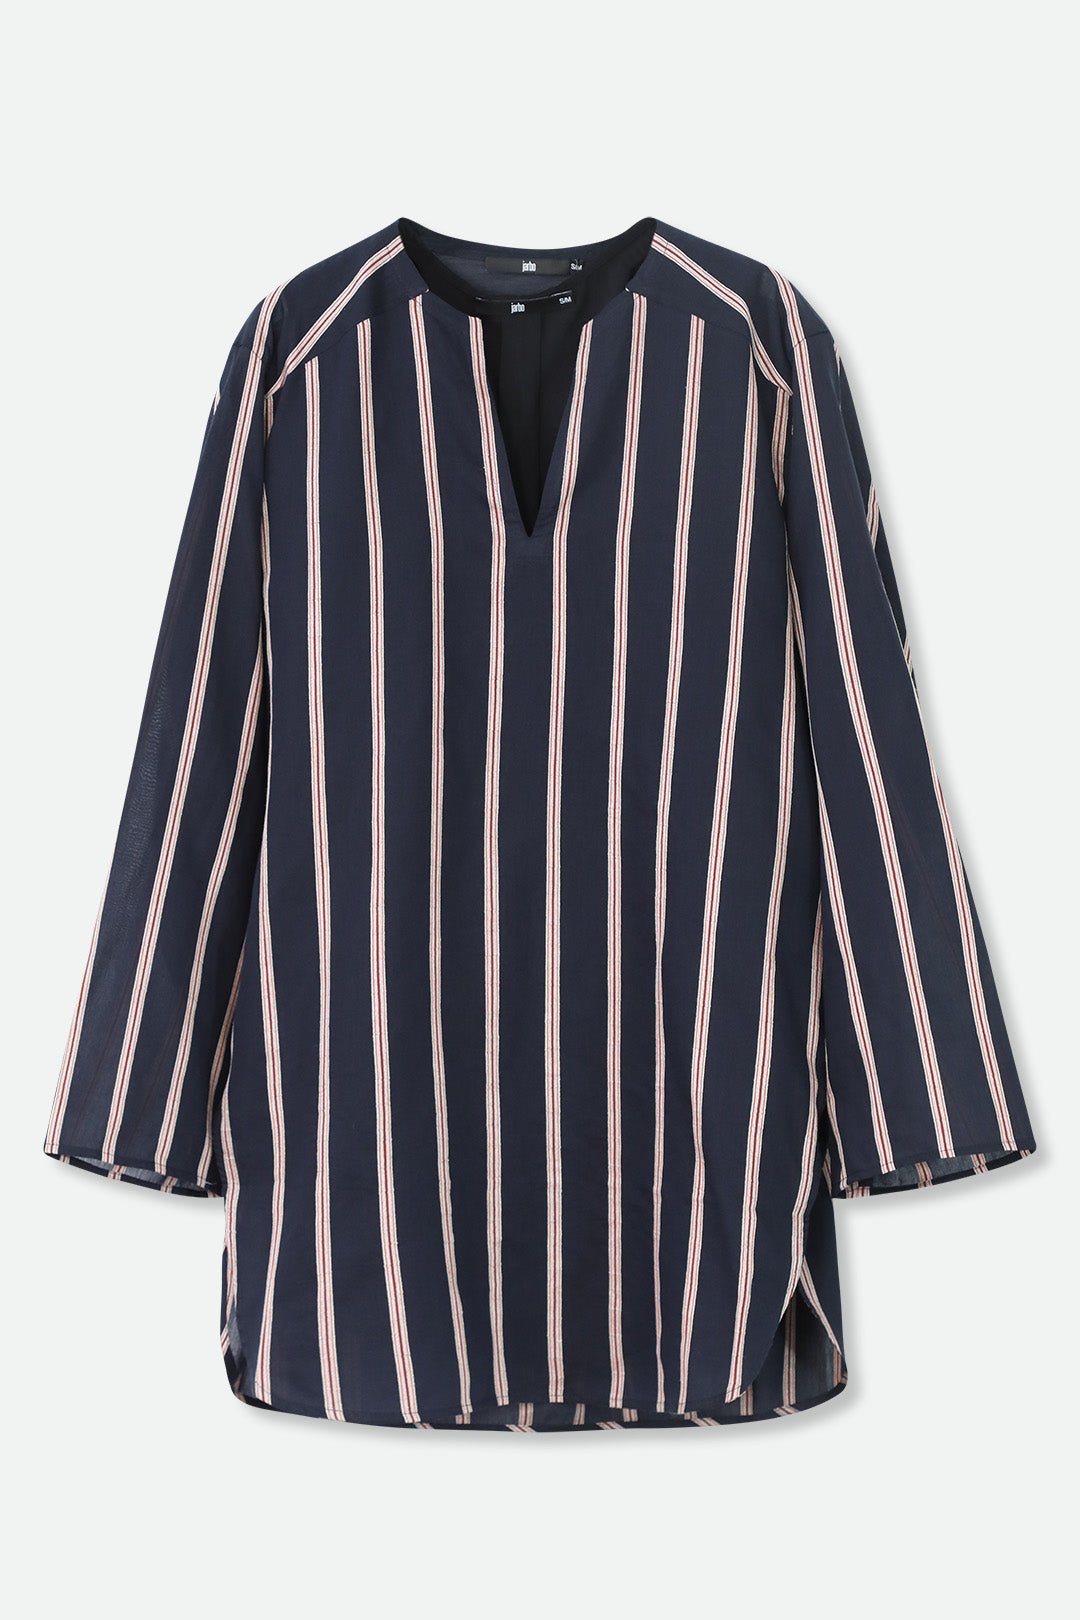 CYPRESS LAYERED SHIRT IN ITALIAN COTTON VOILE NAVY STRIPES - Jarbo